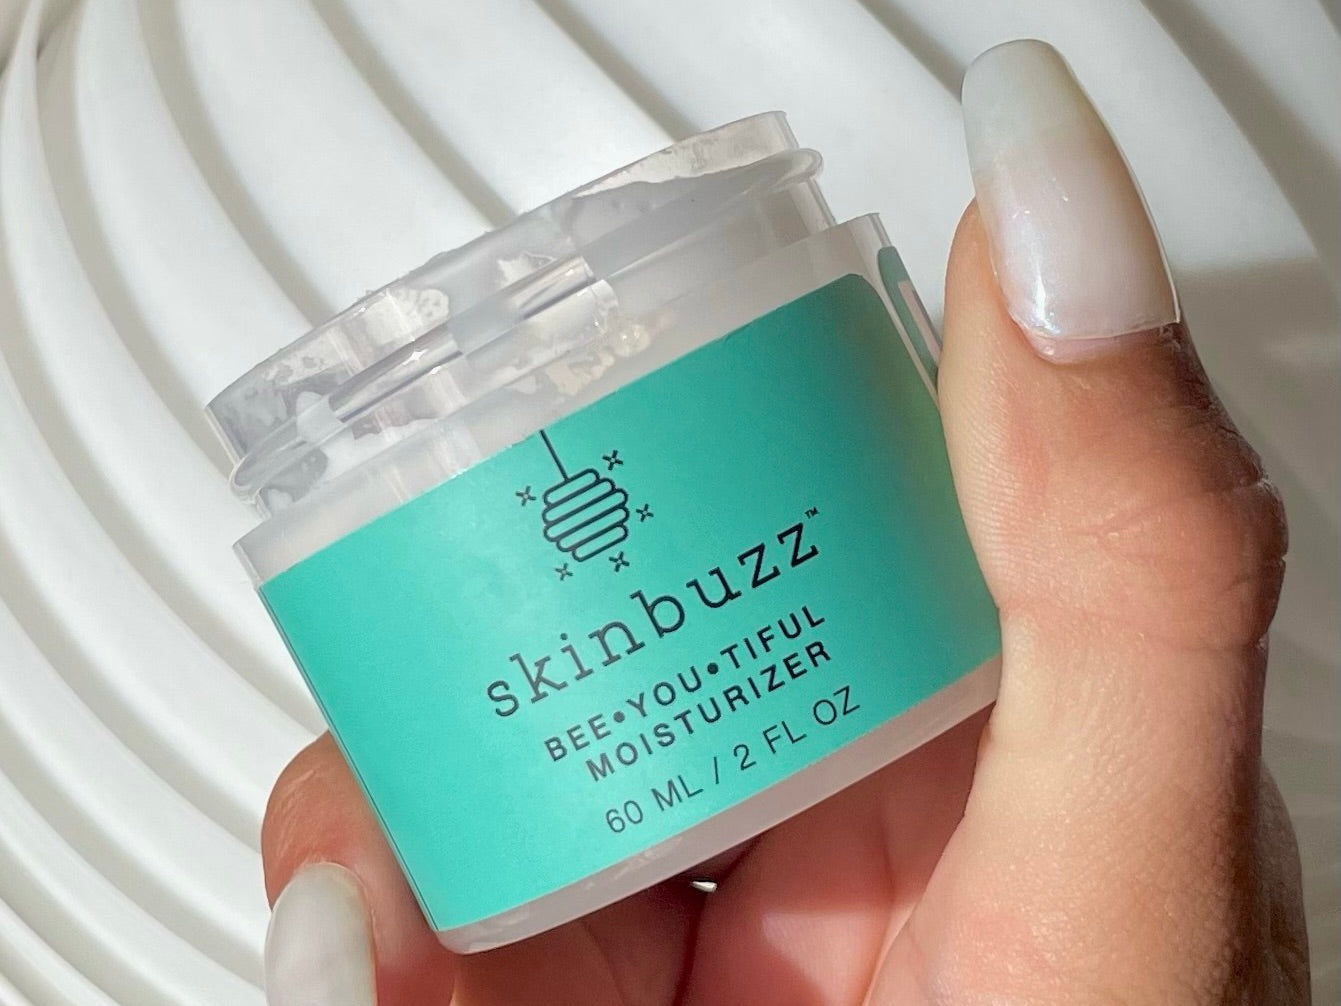 Skinbuzz Bee•You•Tiful Moisturizer, an organic skincare product with beeswax, perfect for summer hydration.